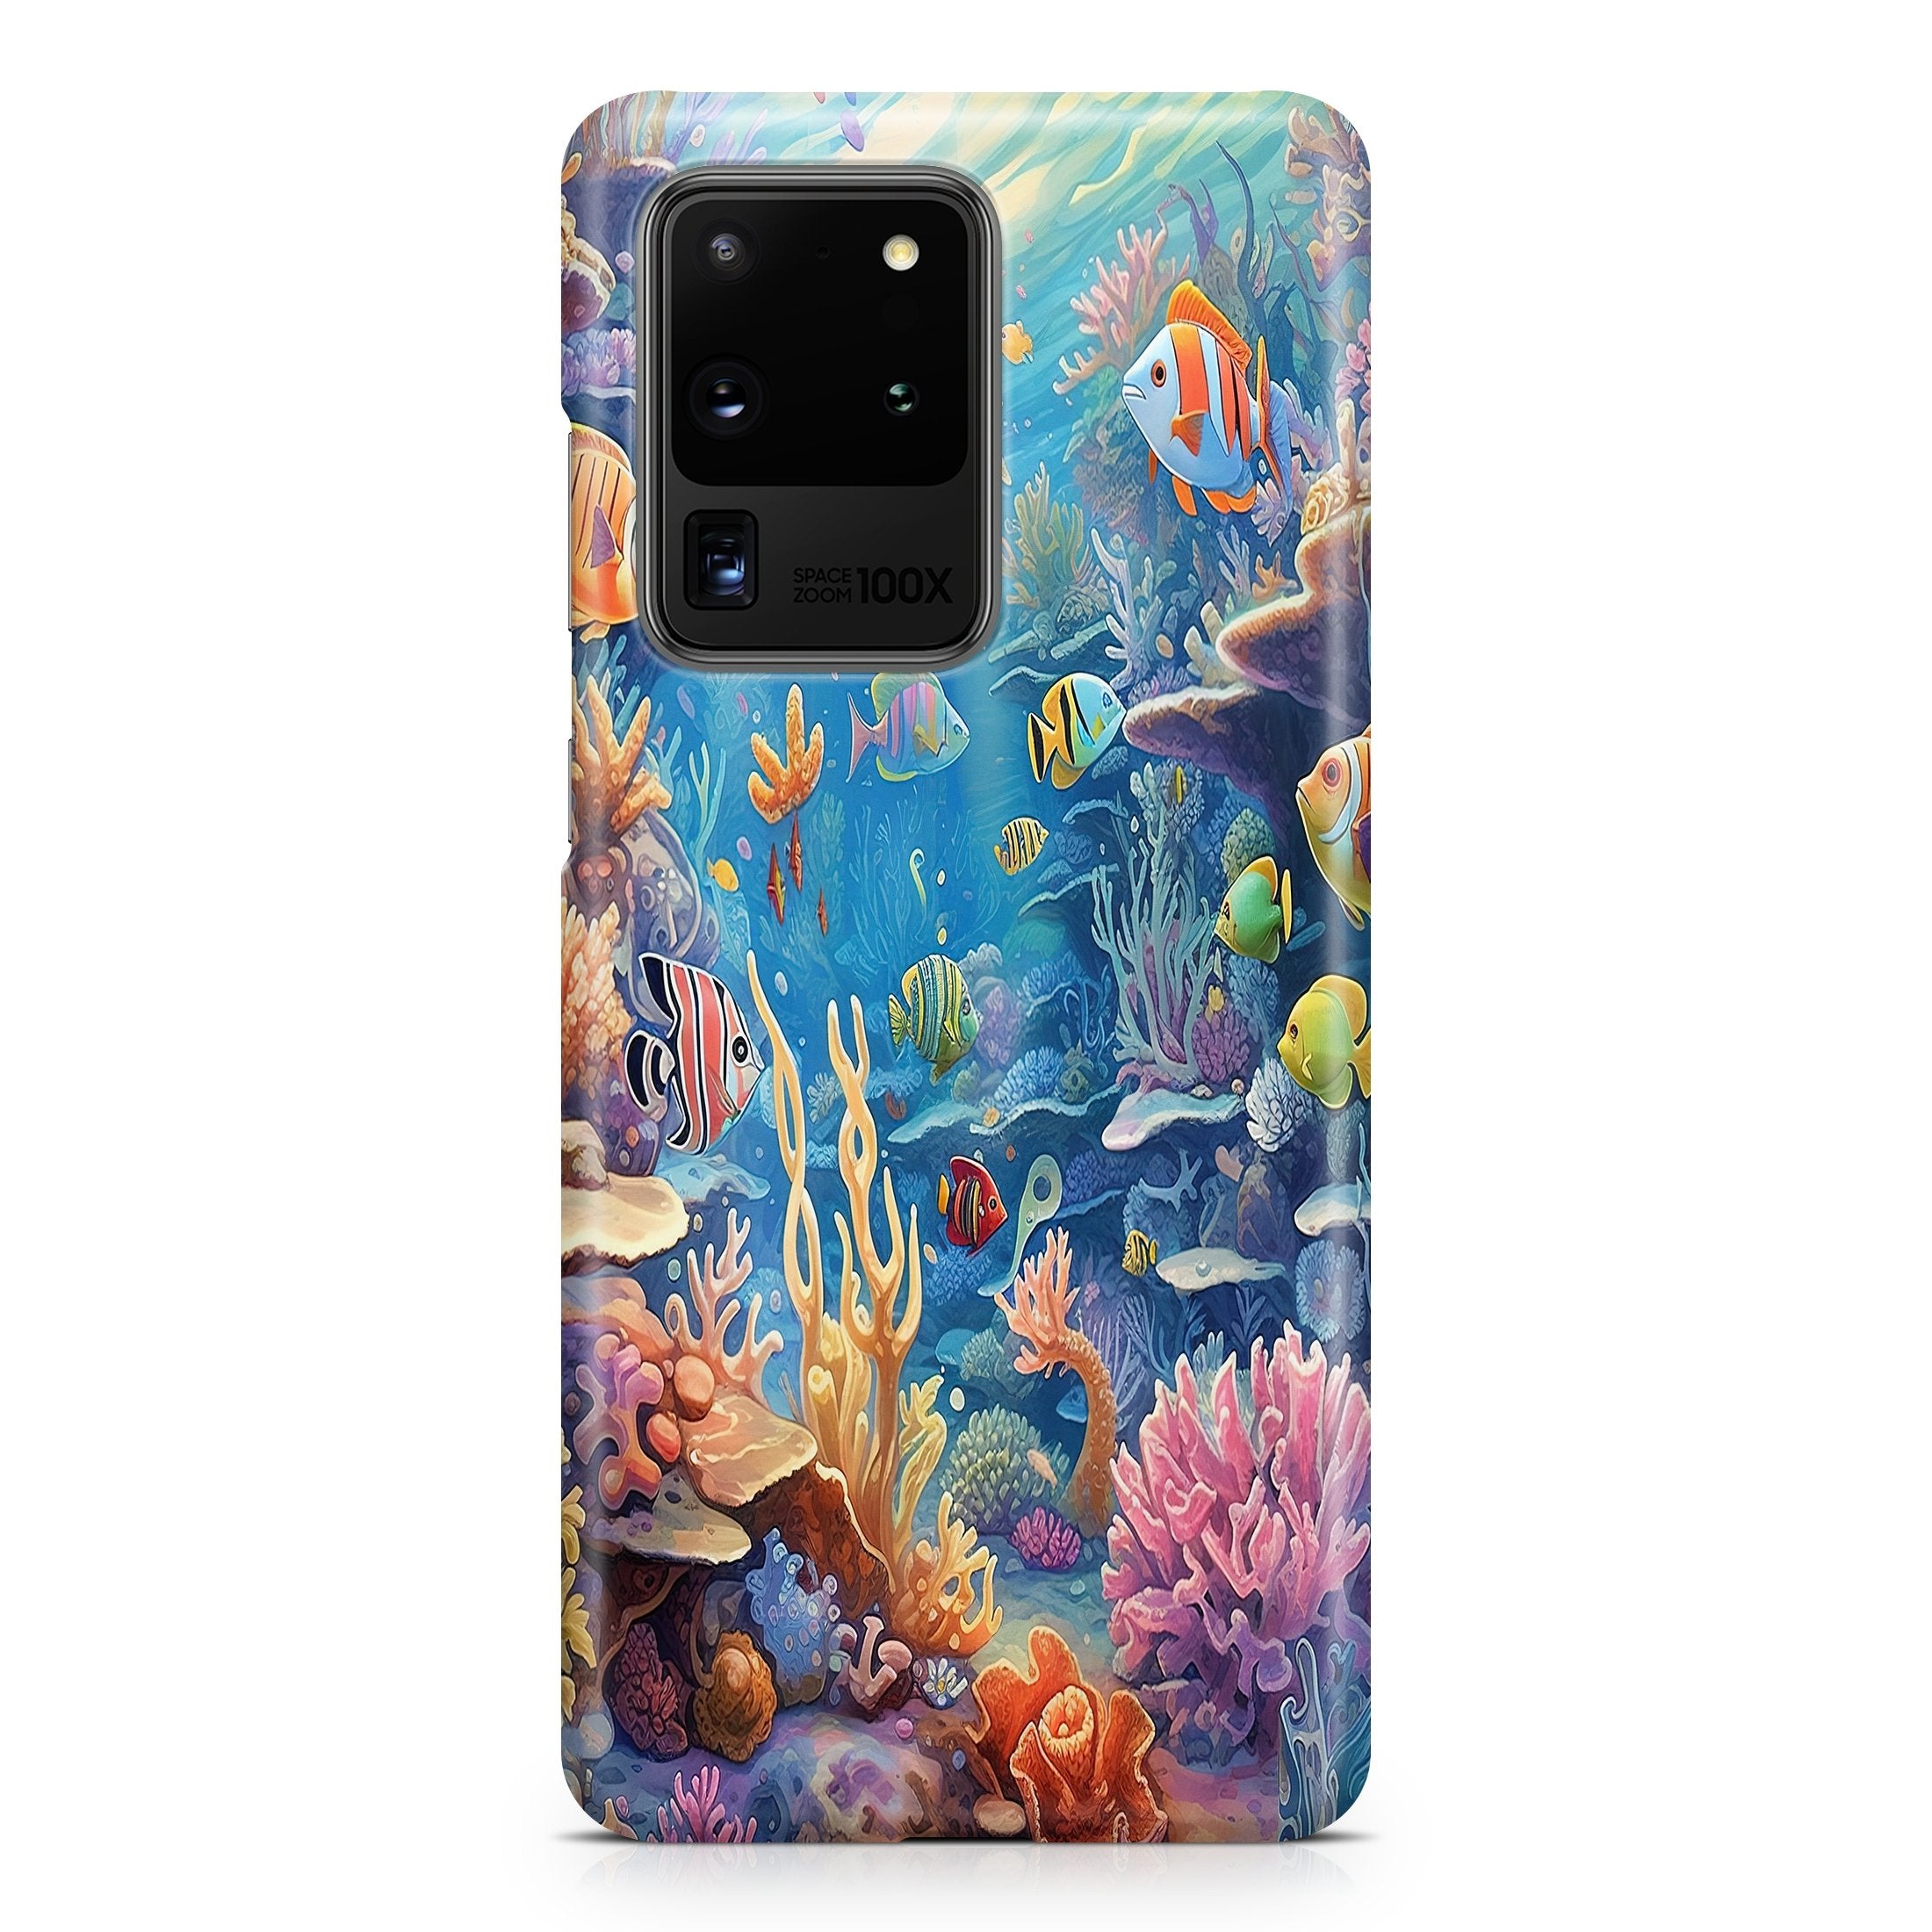 Tropical Eden - Samsung phone case designs by CaseSwagger